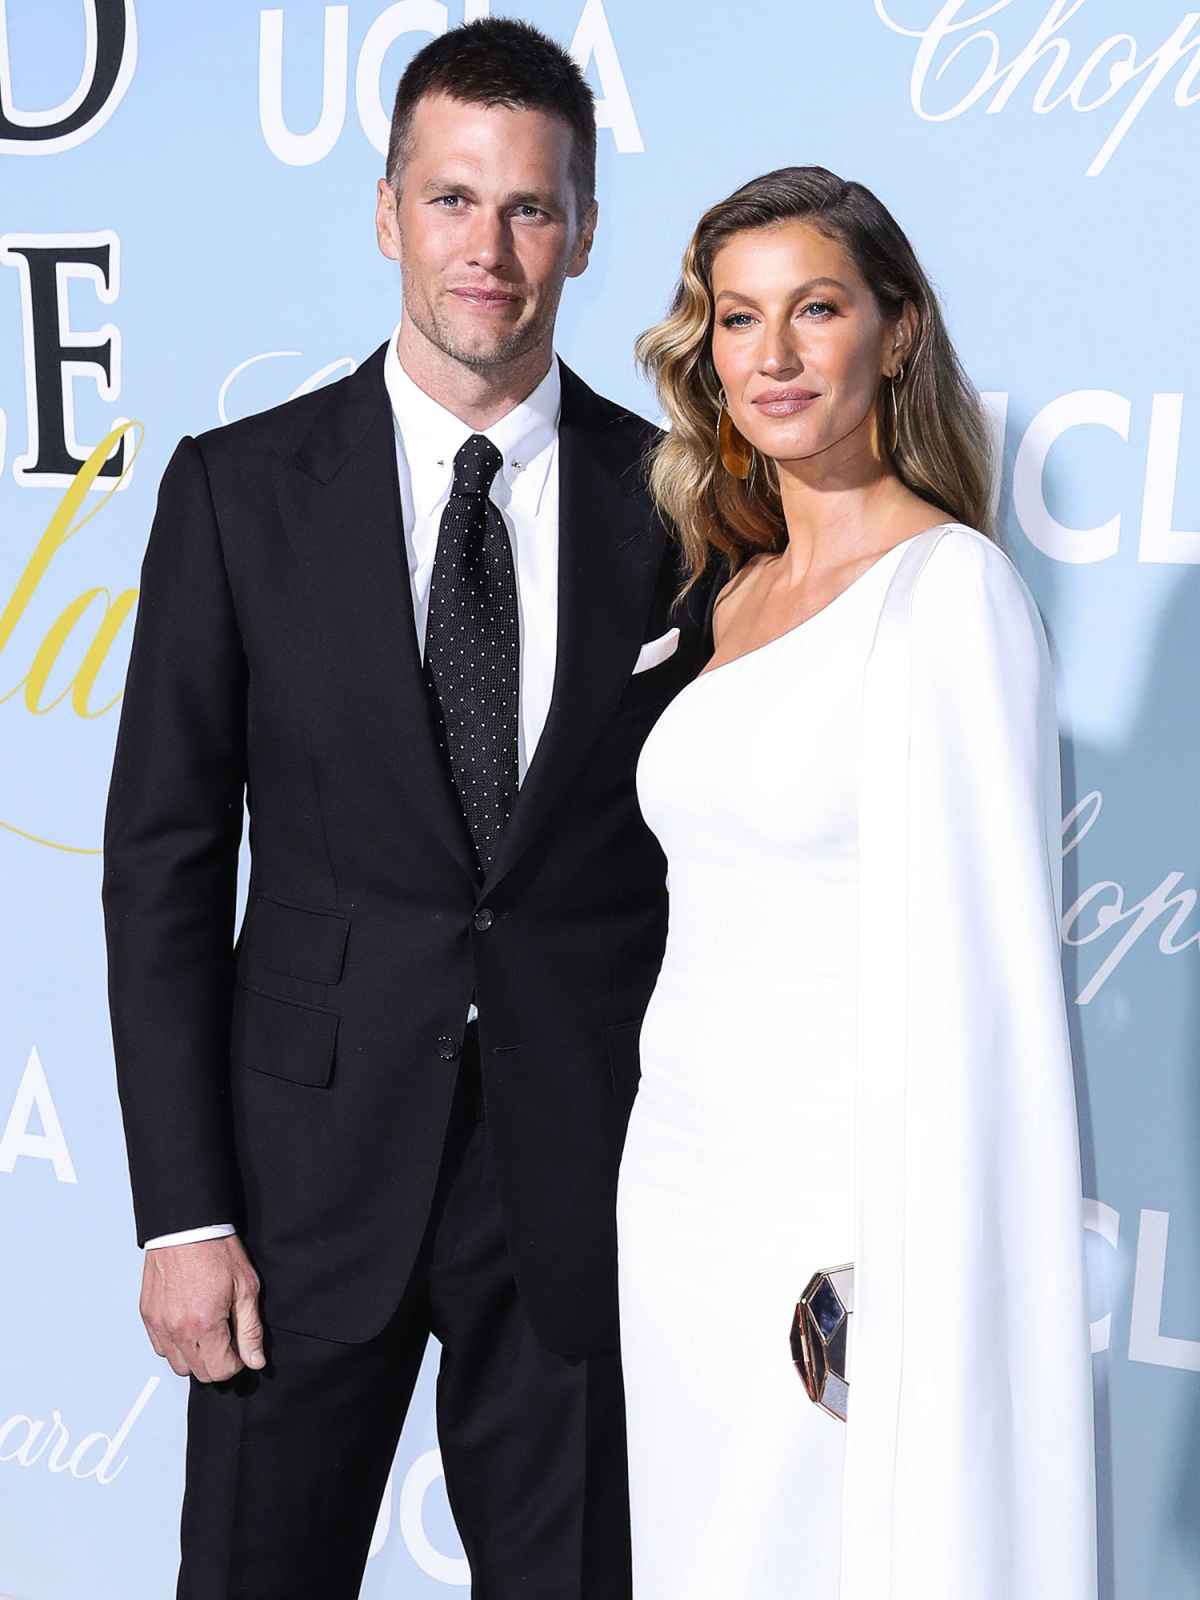 Gisele Bündchen Just Addressed Her Marital Issues: I've Told Tom Brady  'Over And Over' To 'Be More Present' - SHEfinds